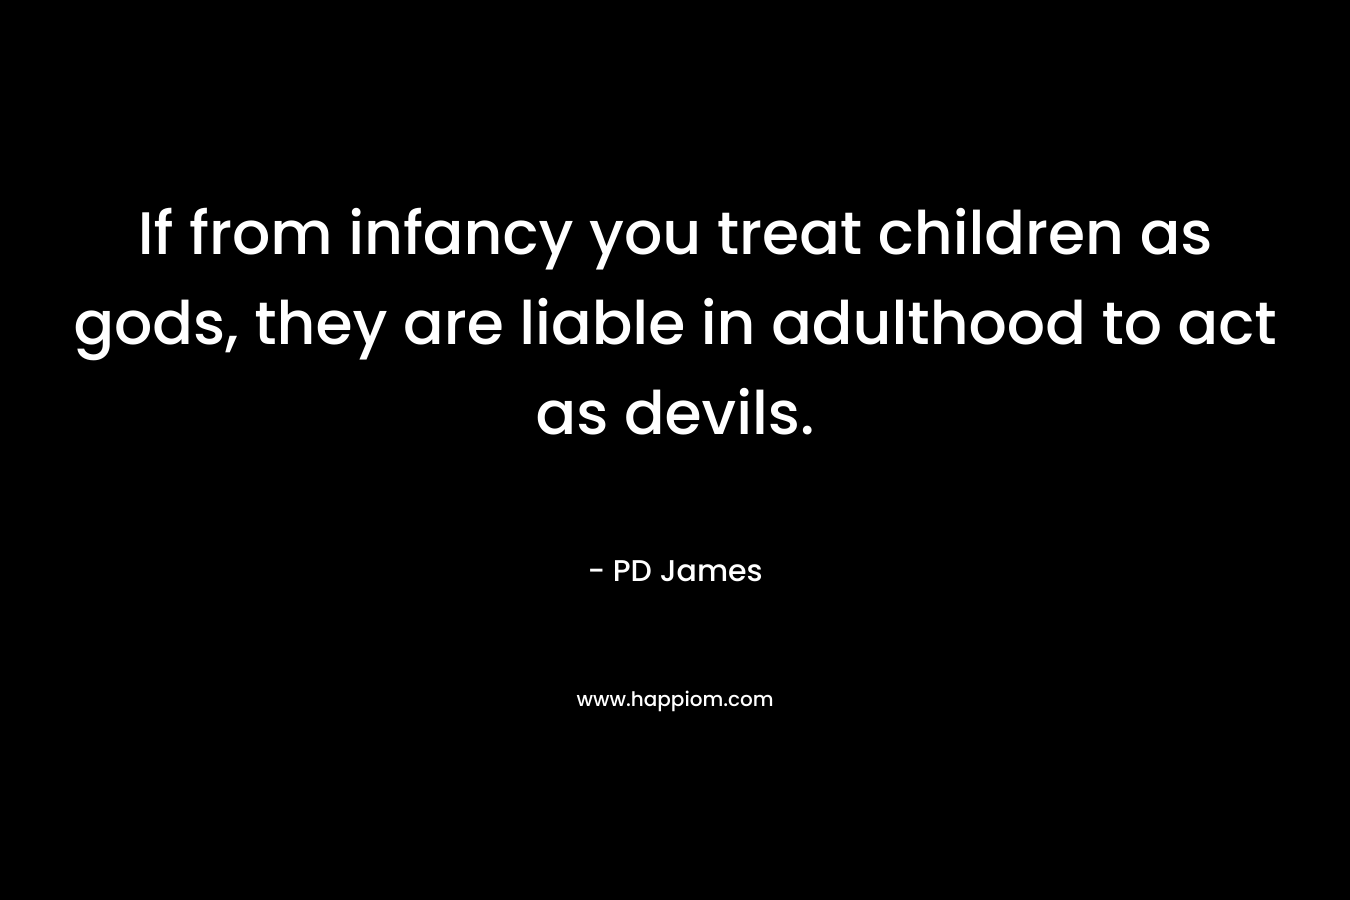 If from infancy you treat children as gods, they are liable in adulthood to act as devils.